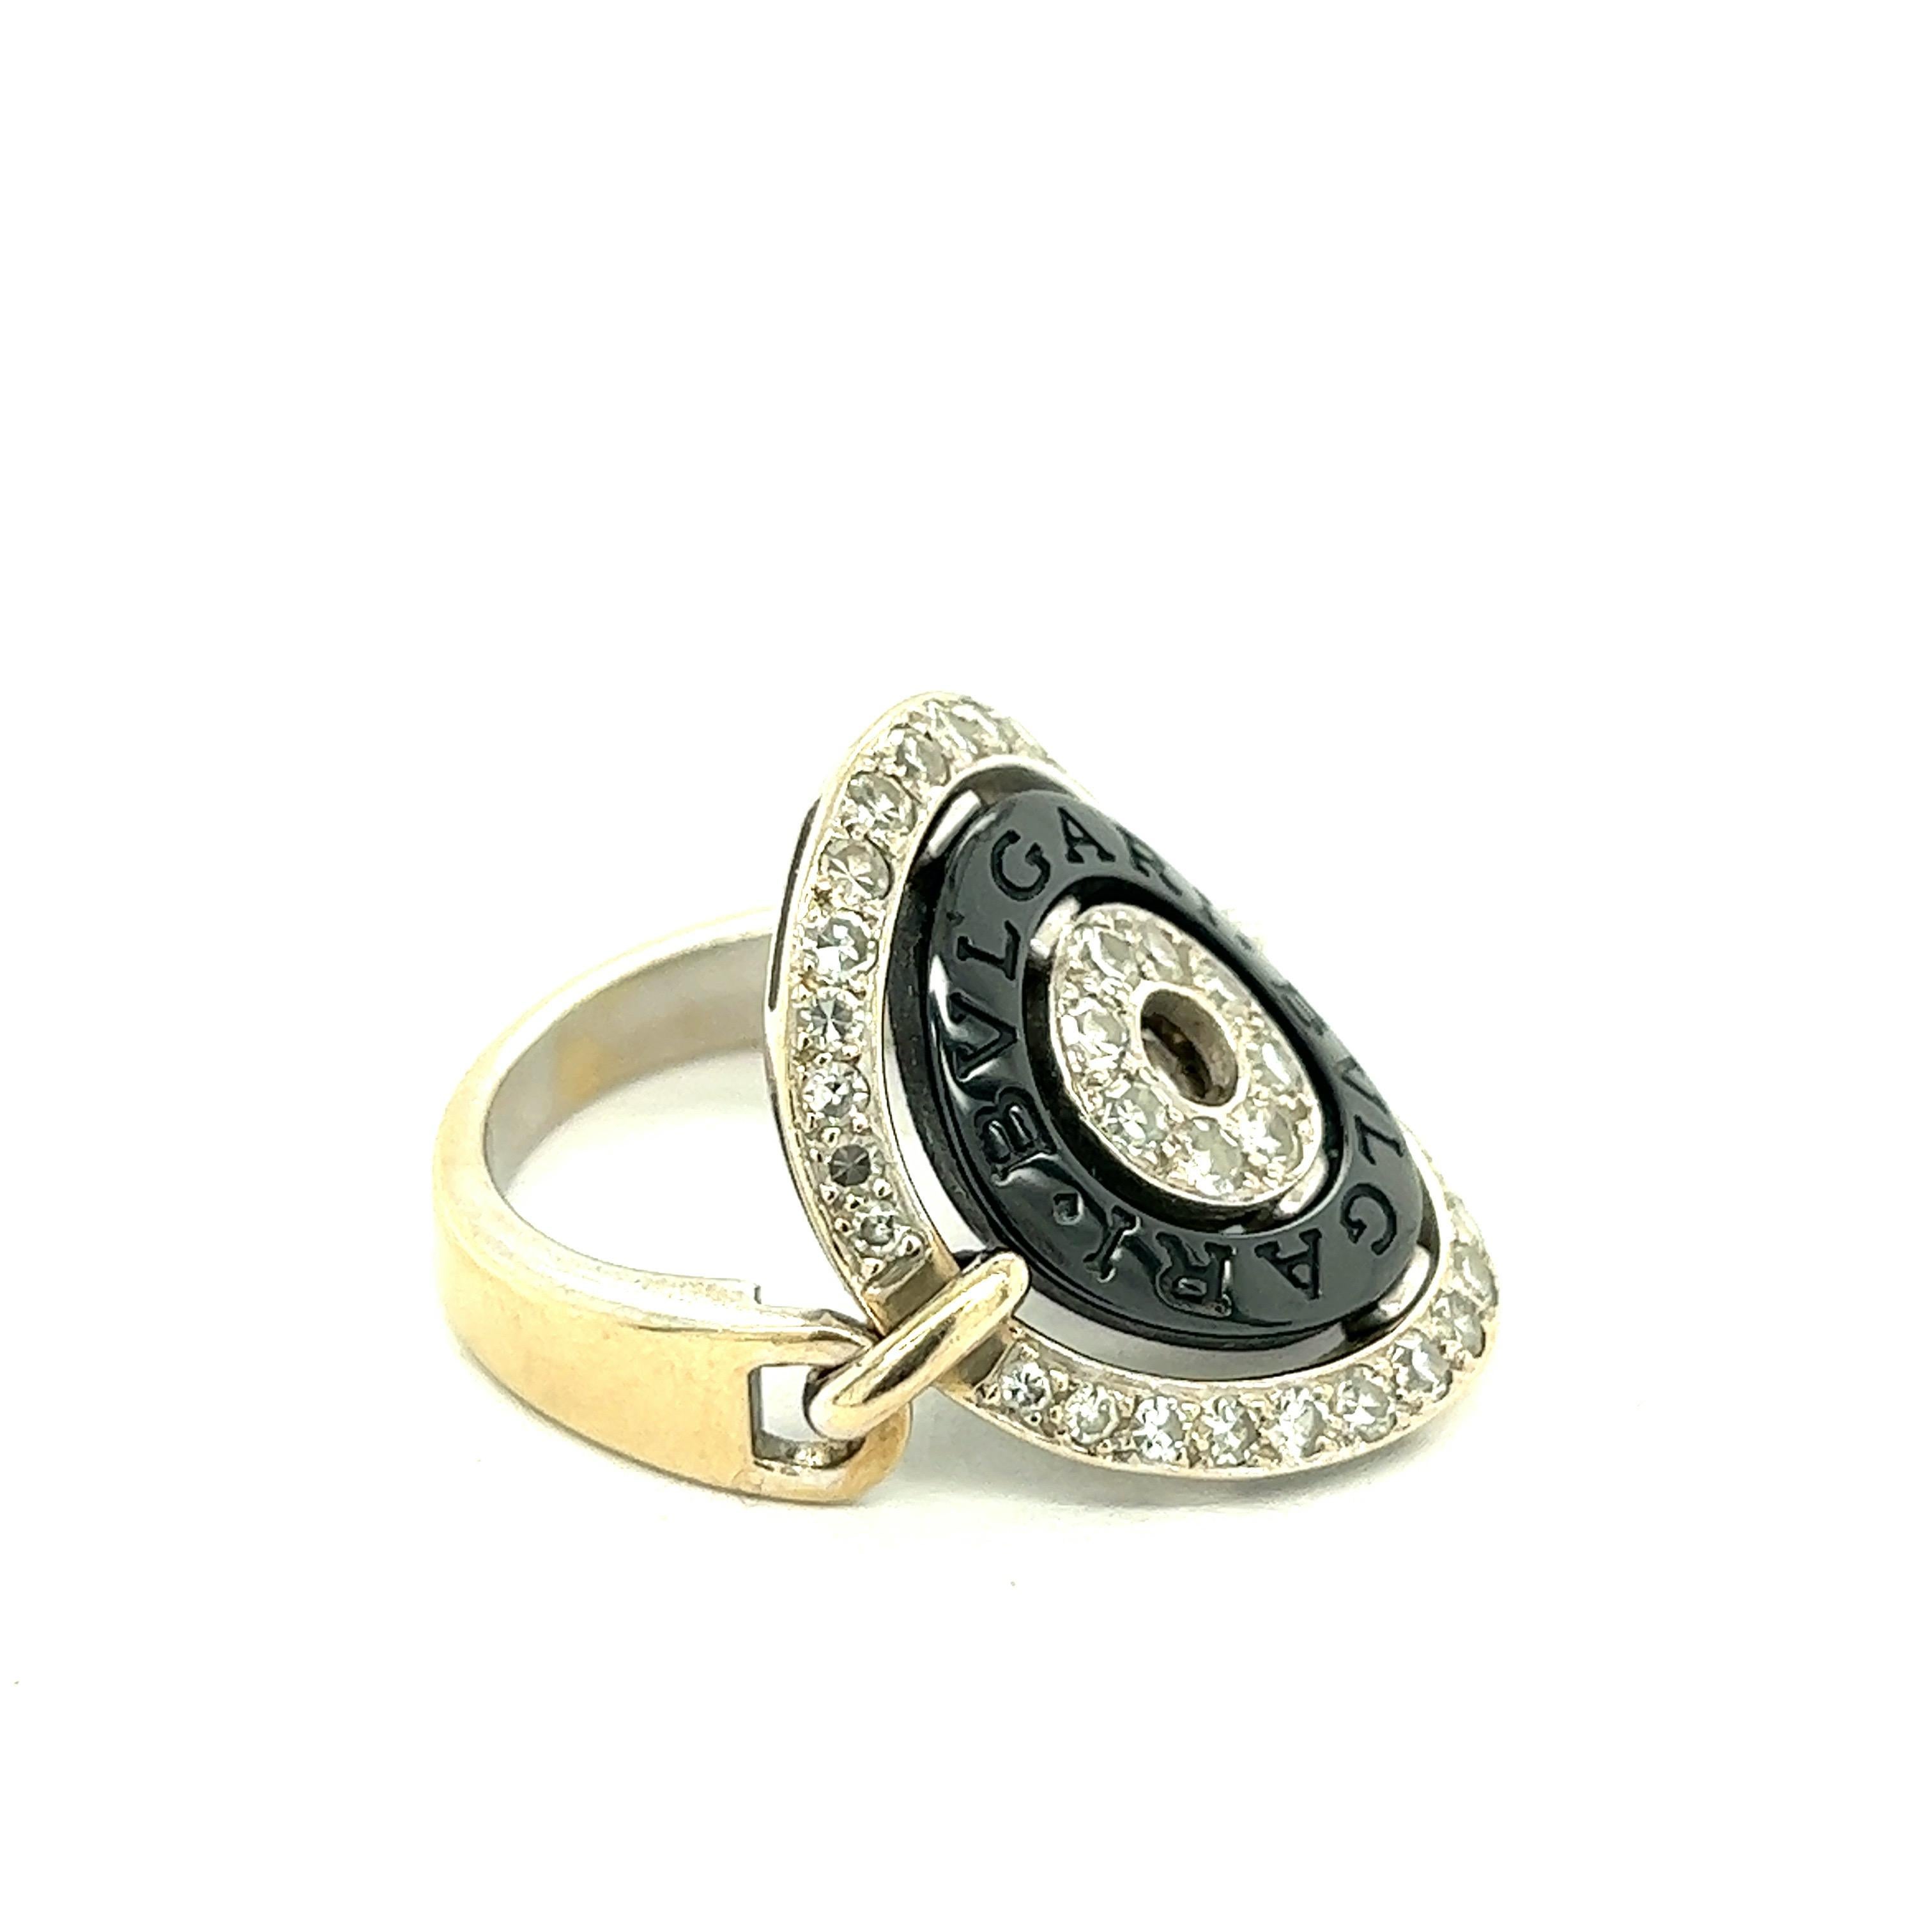 Bvlgari Astrale Movable 18k White Gold Diamond Ring For Sale 5